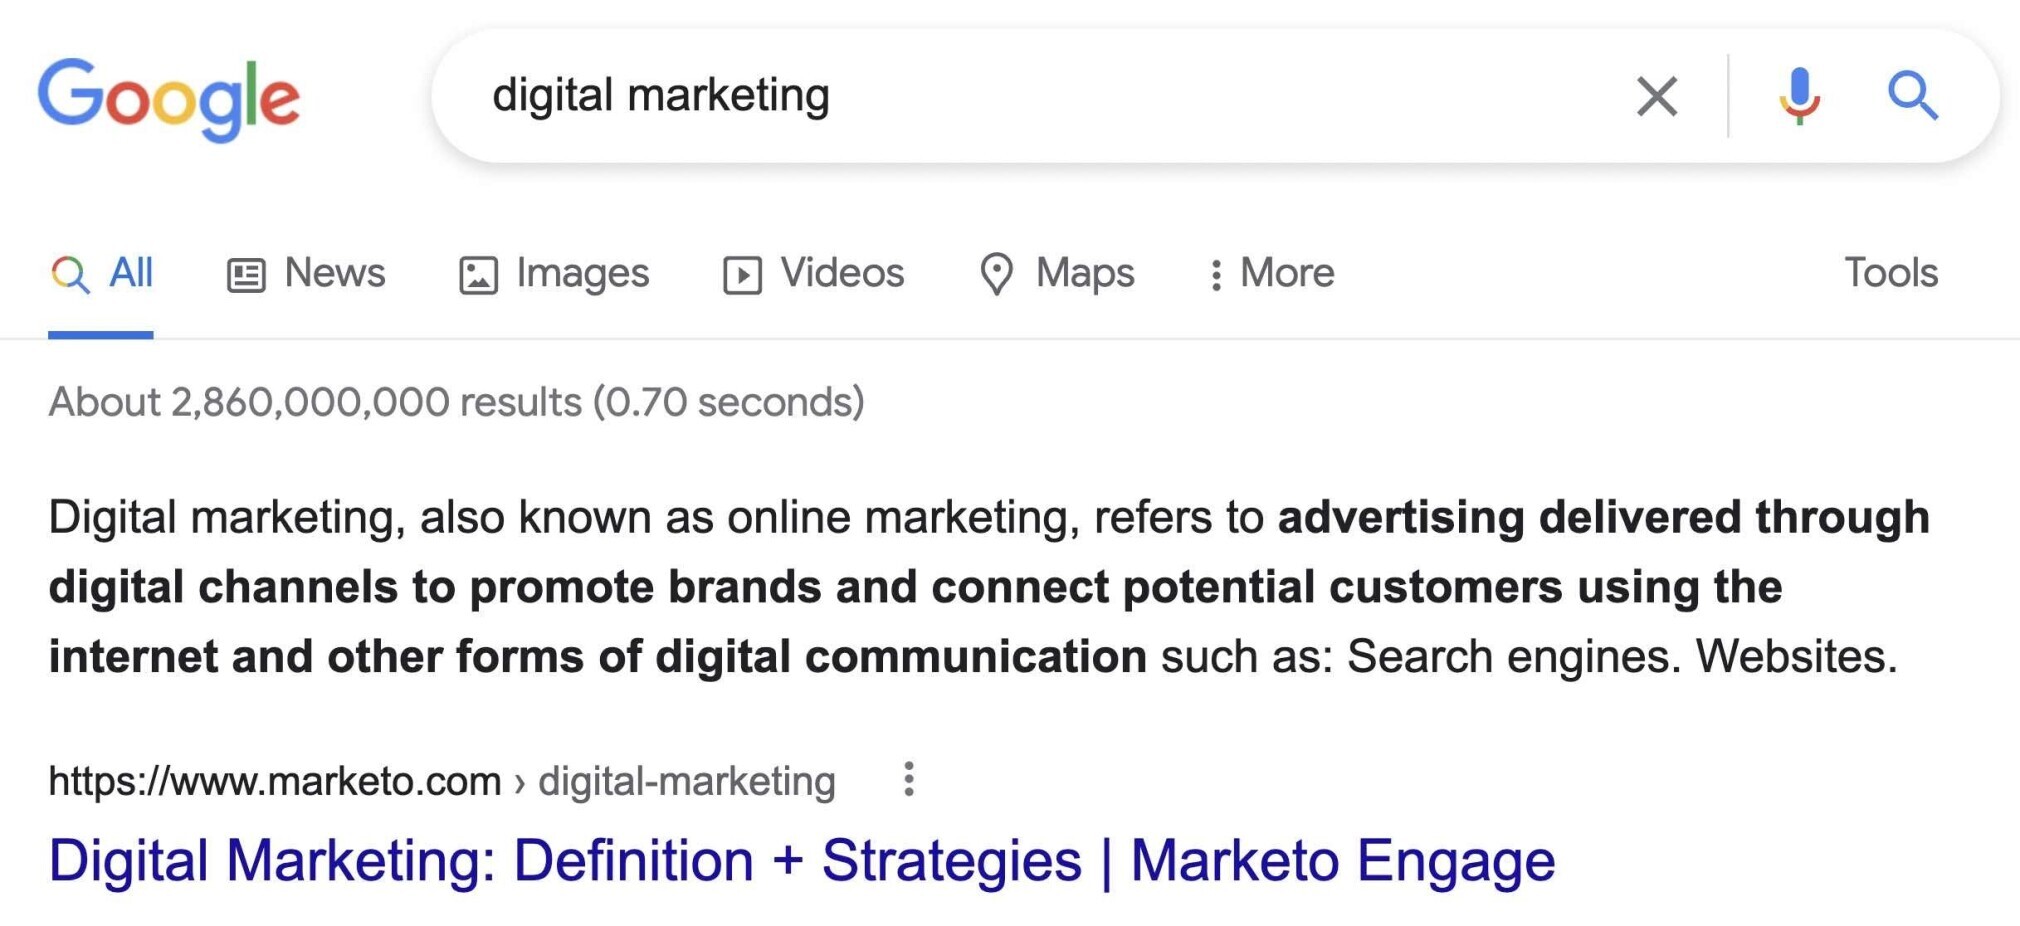 Featured snippet for "digital marketing"